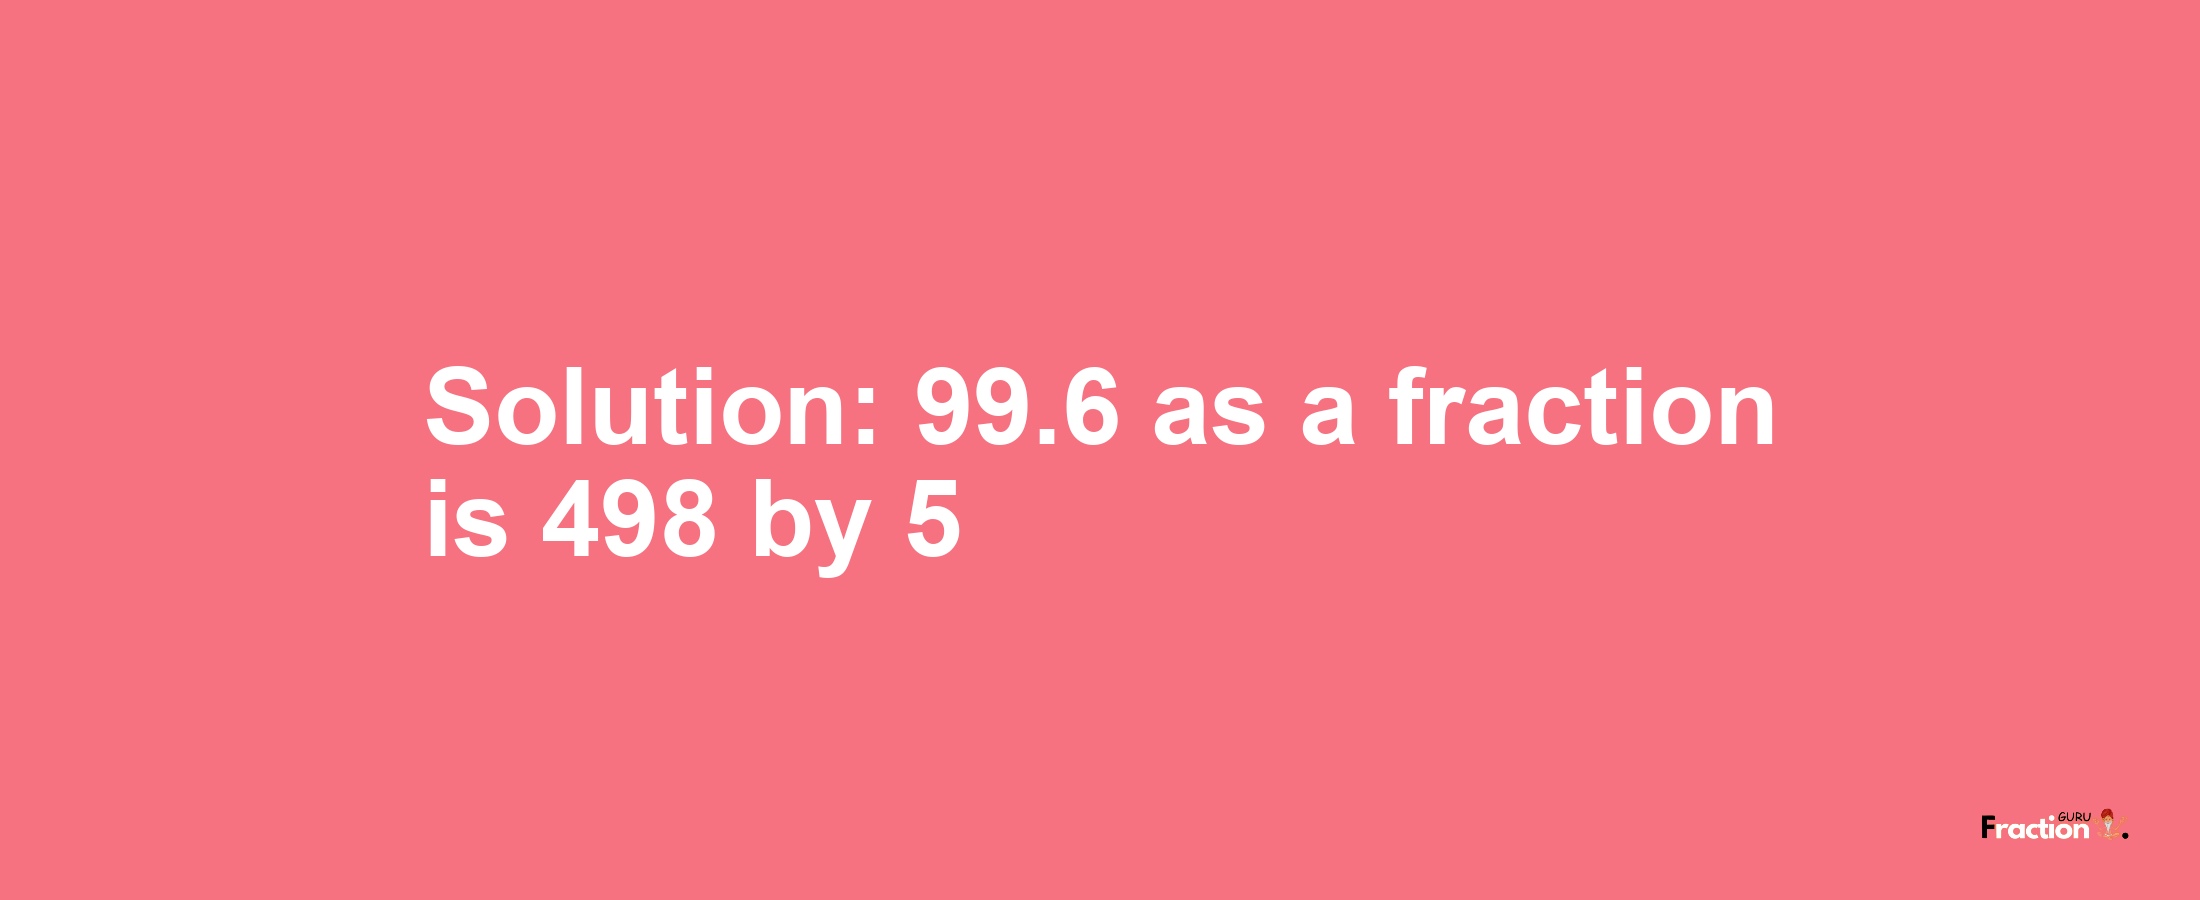 Solution:99.6 as a fraction is 498/5